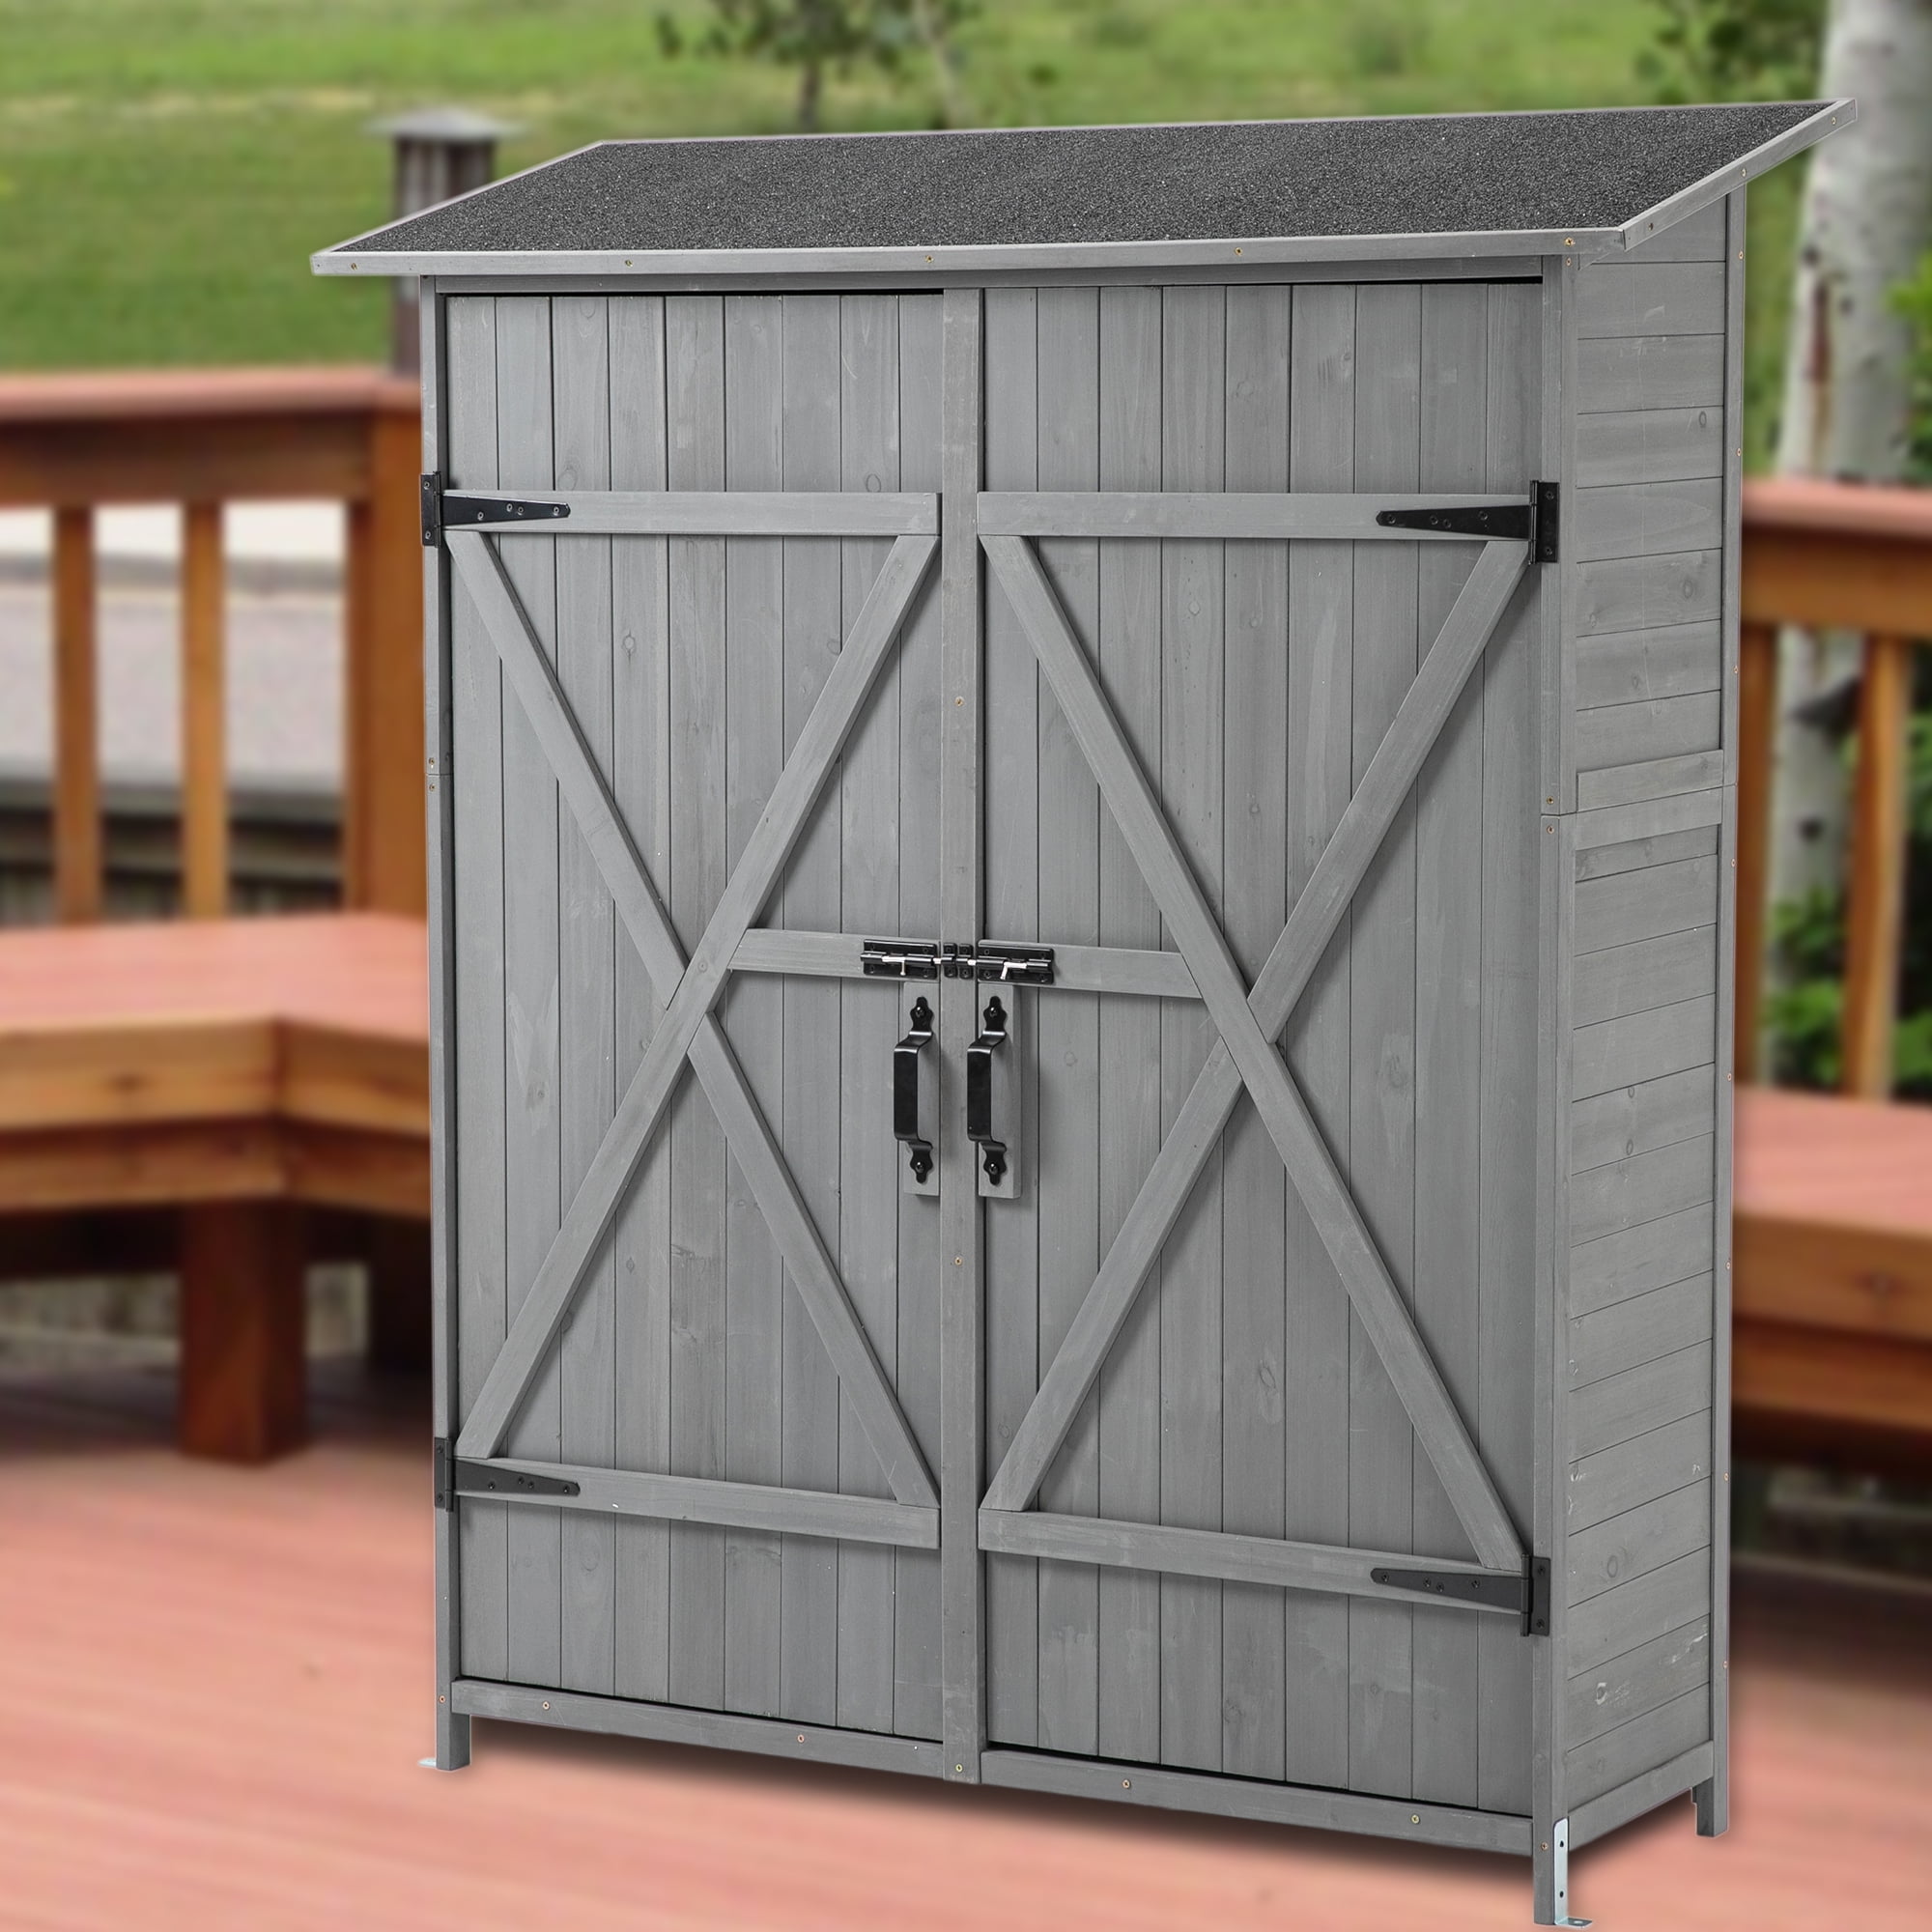 CASEMIOL Patio Storage Shed with Detachable Shelves and Hooks